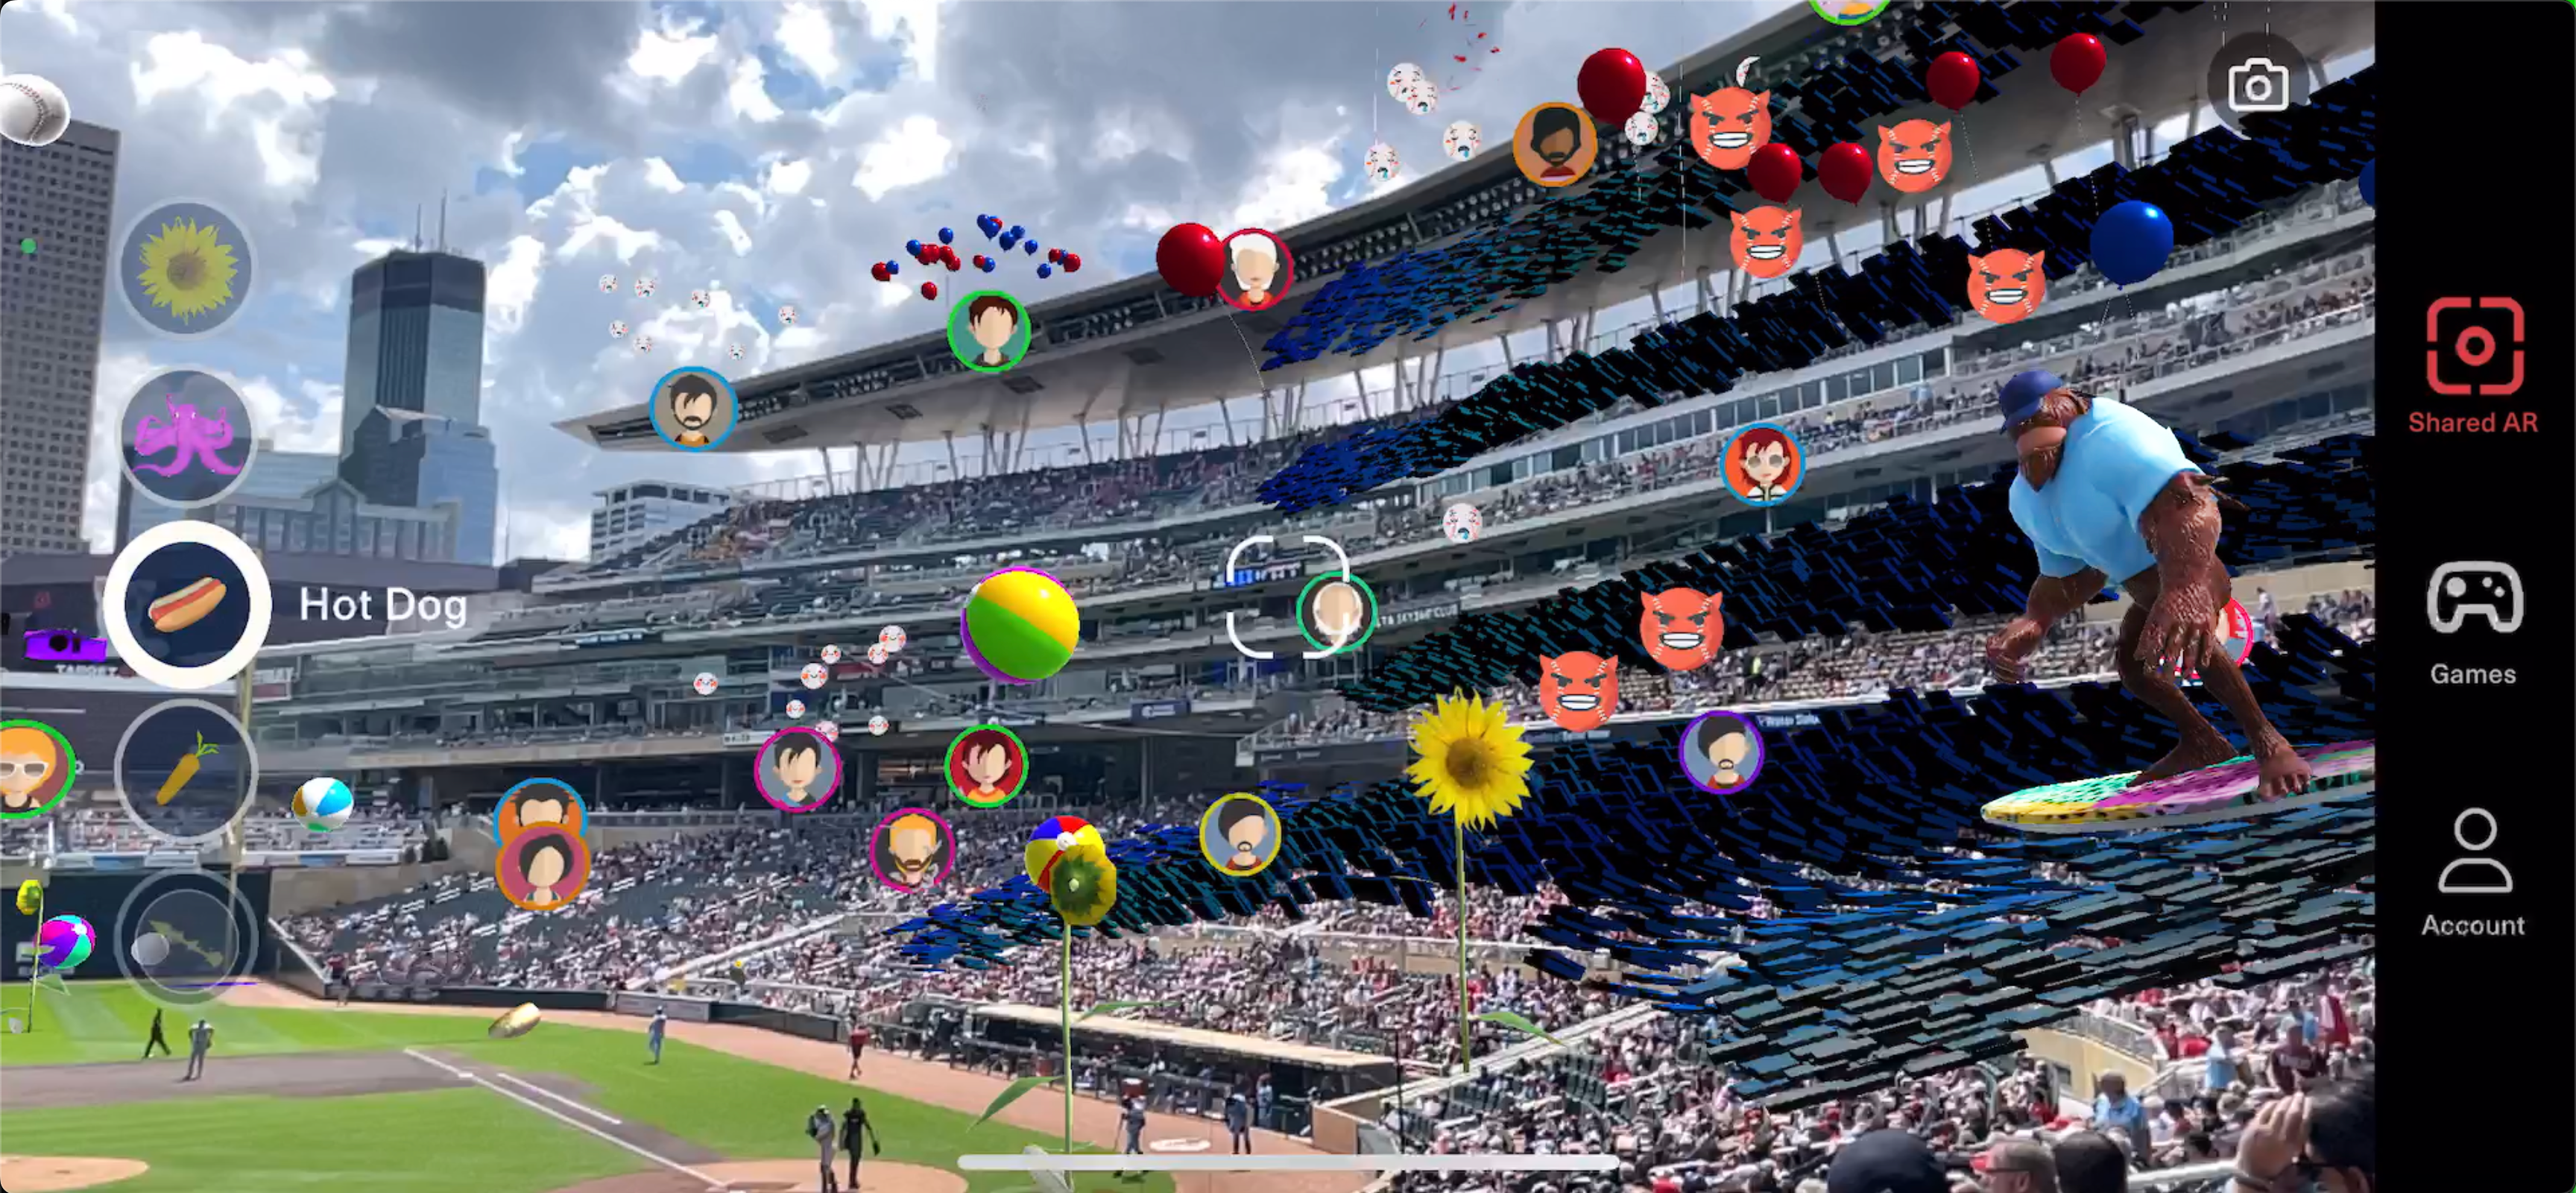 Stagwell The Minnesota Twins Bring ARound, First Shared Augmented Reality Experience in a Live Sports Venue, to Target Field